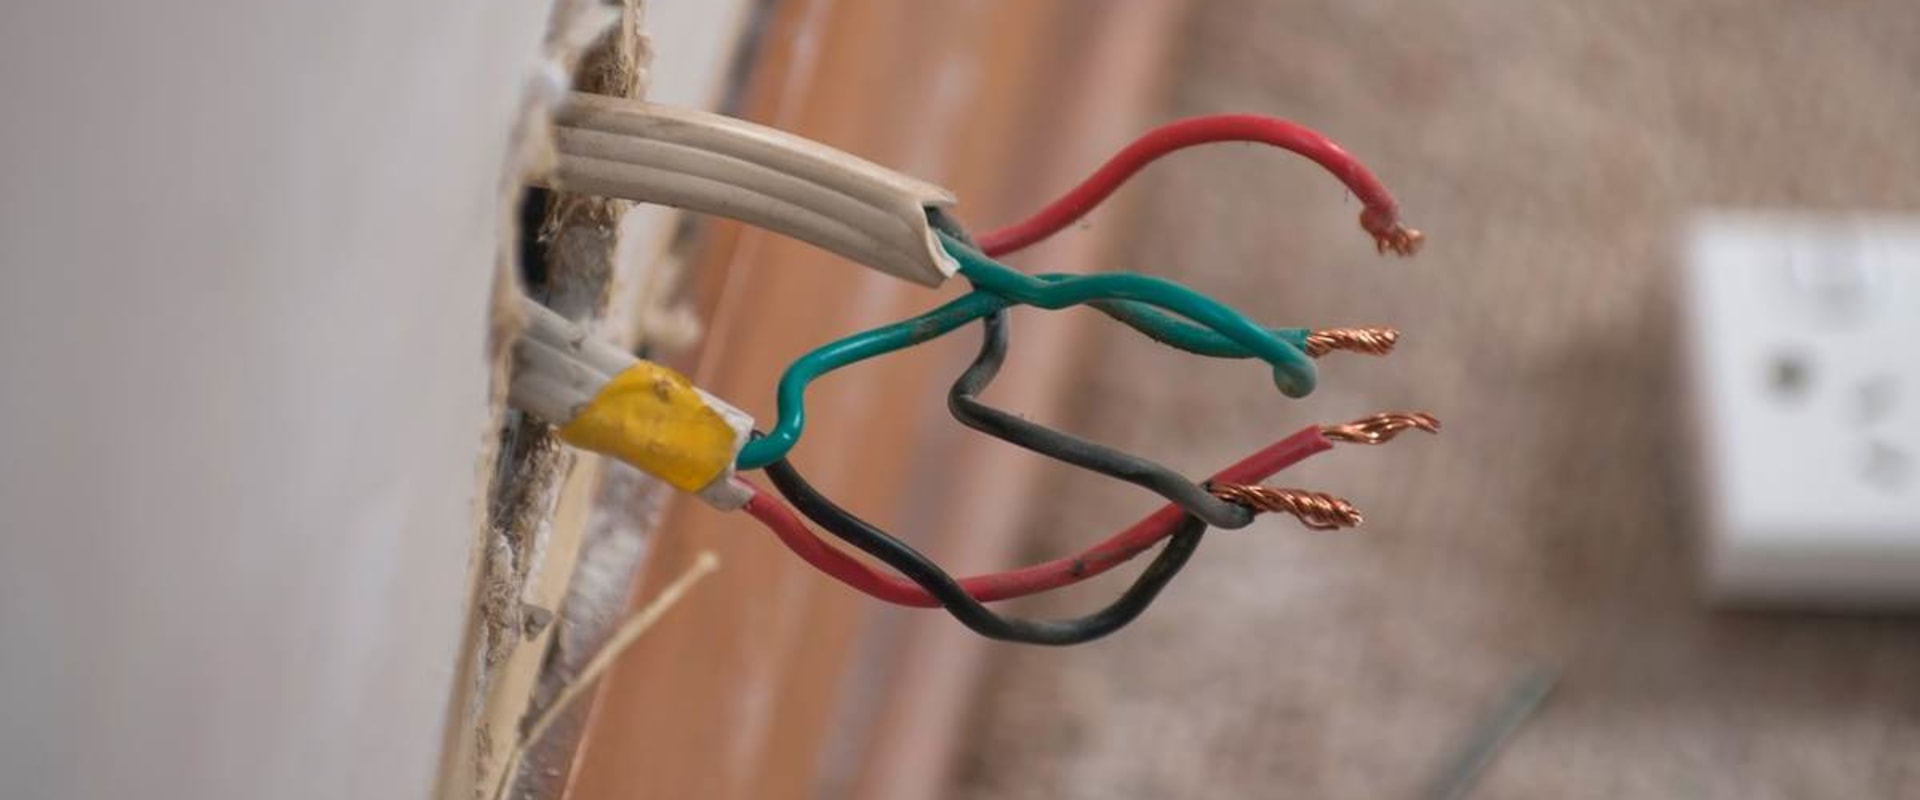 How to Tell if Electrical Connections Need to be Inspected or Tightened